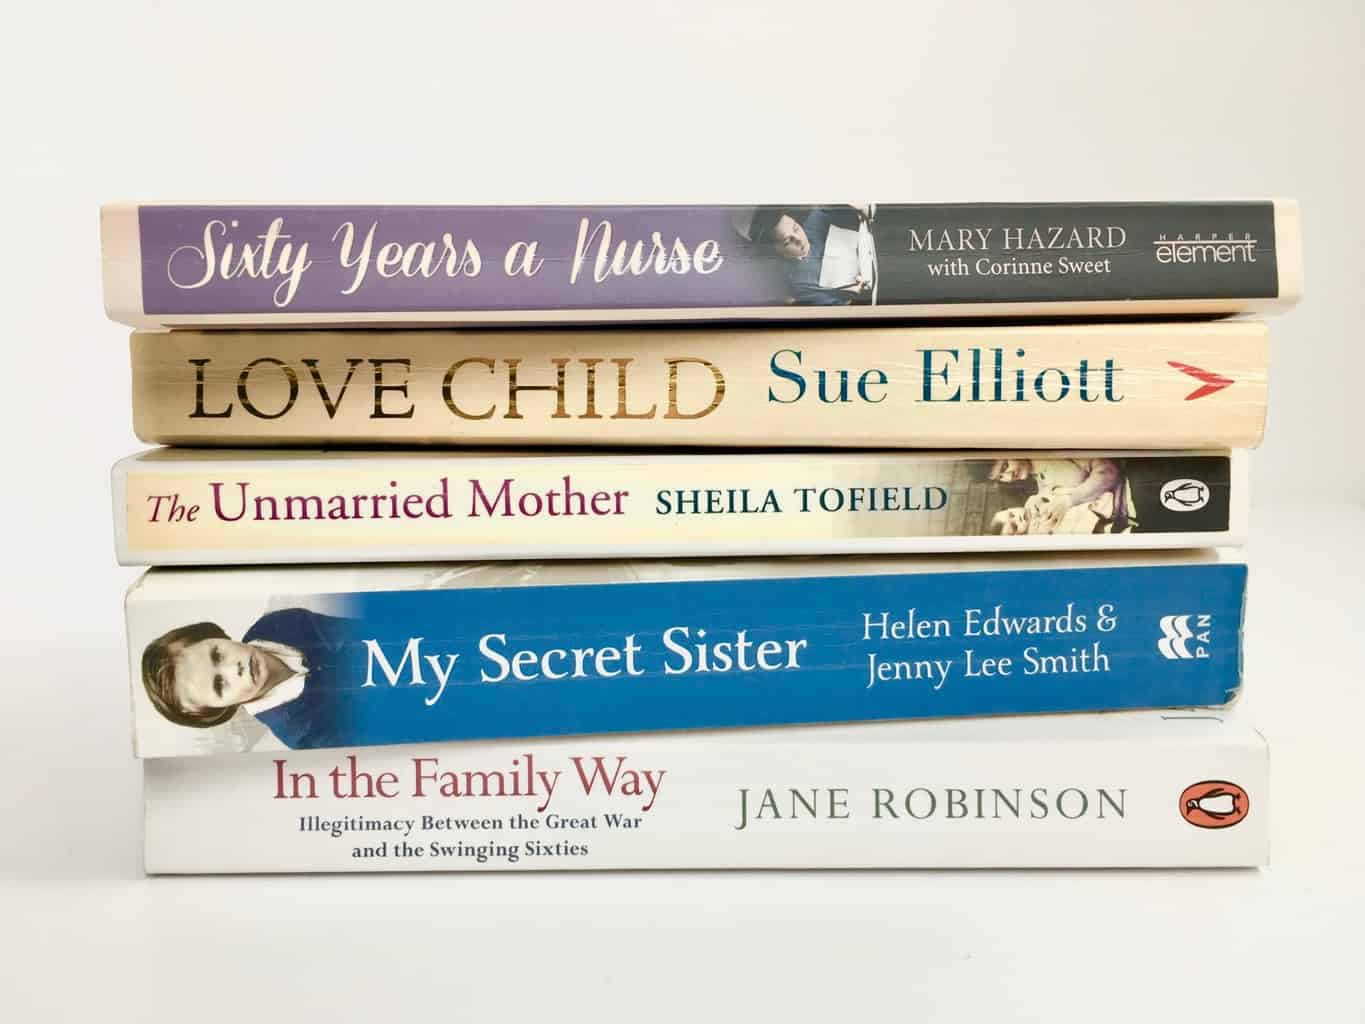 Books about unmarried mothers in 1950s England